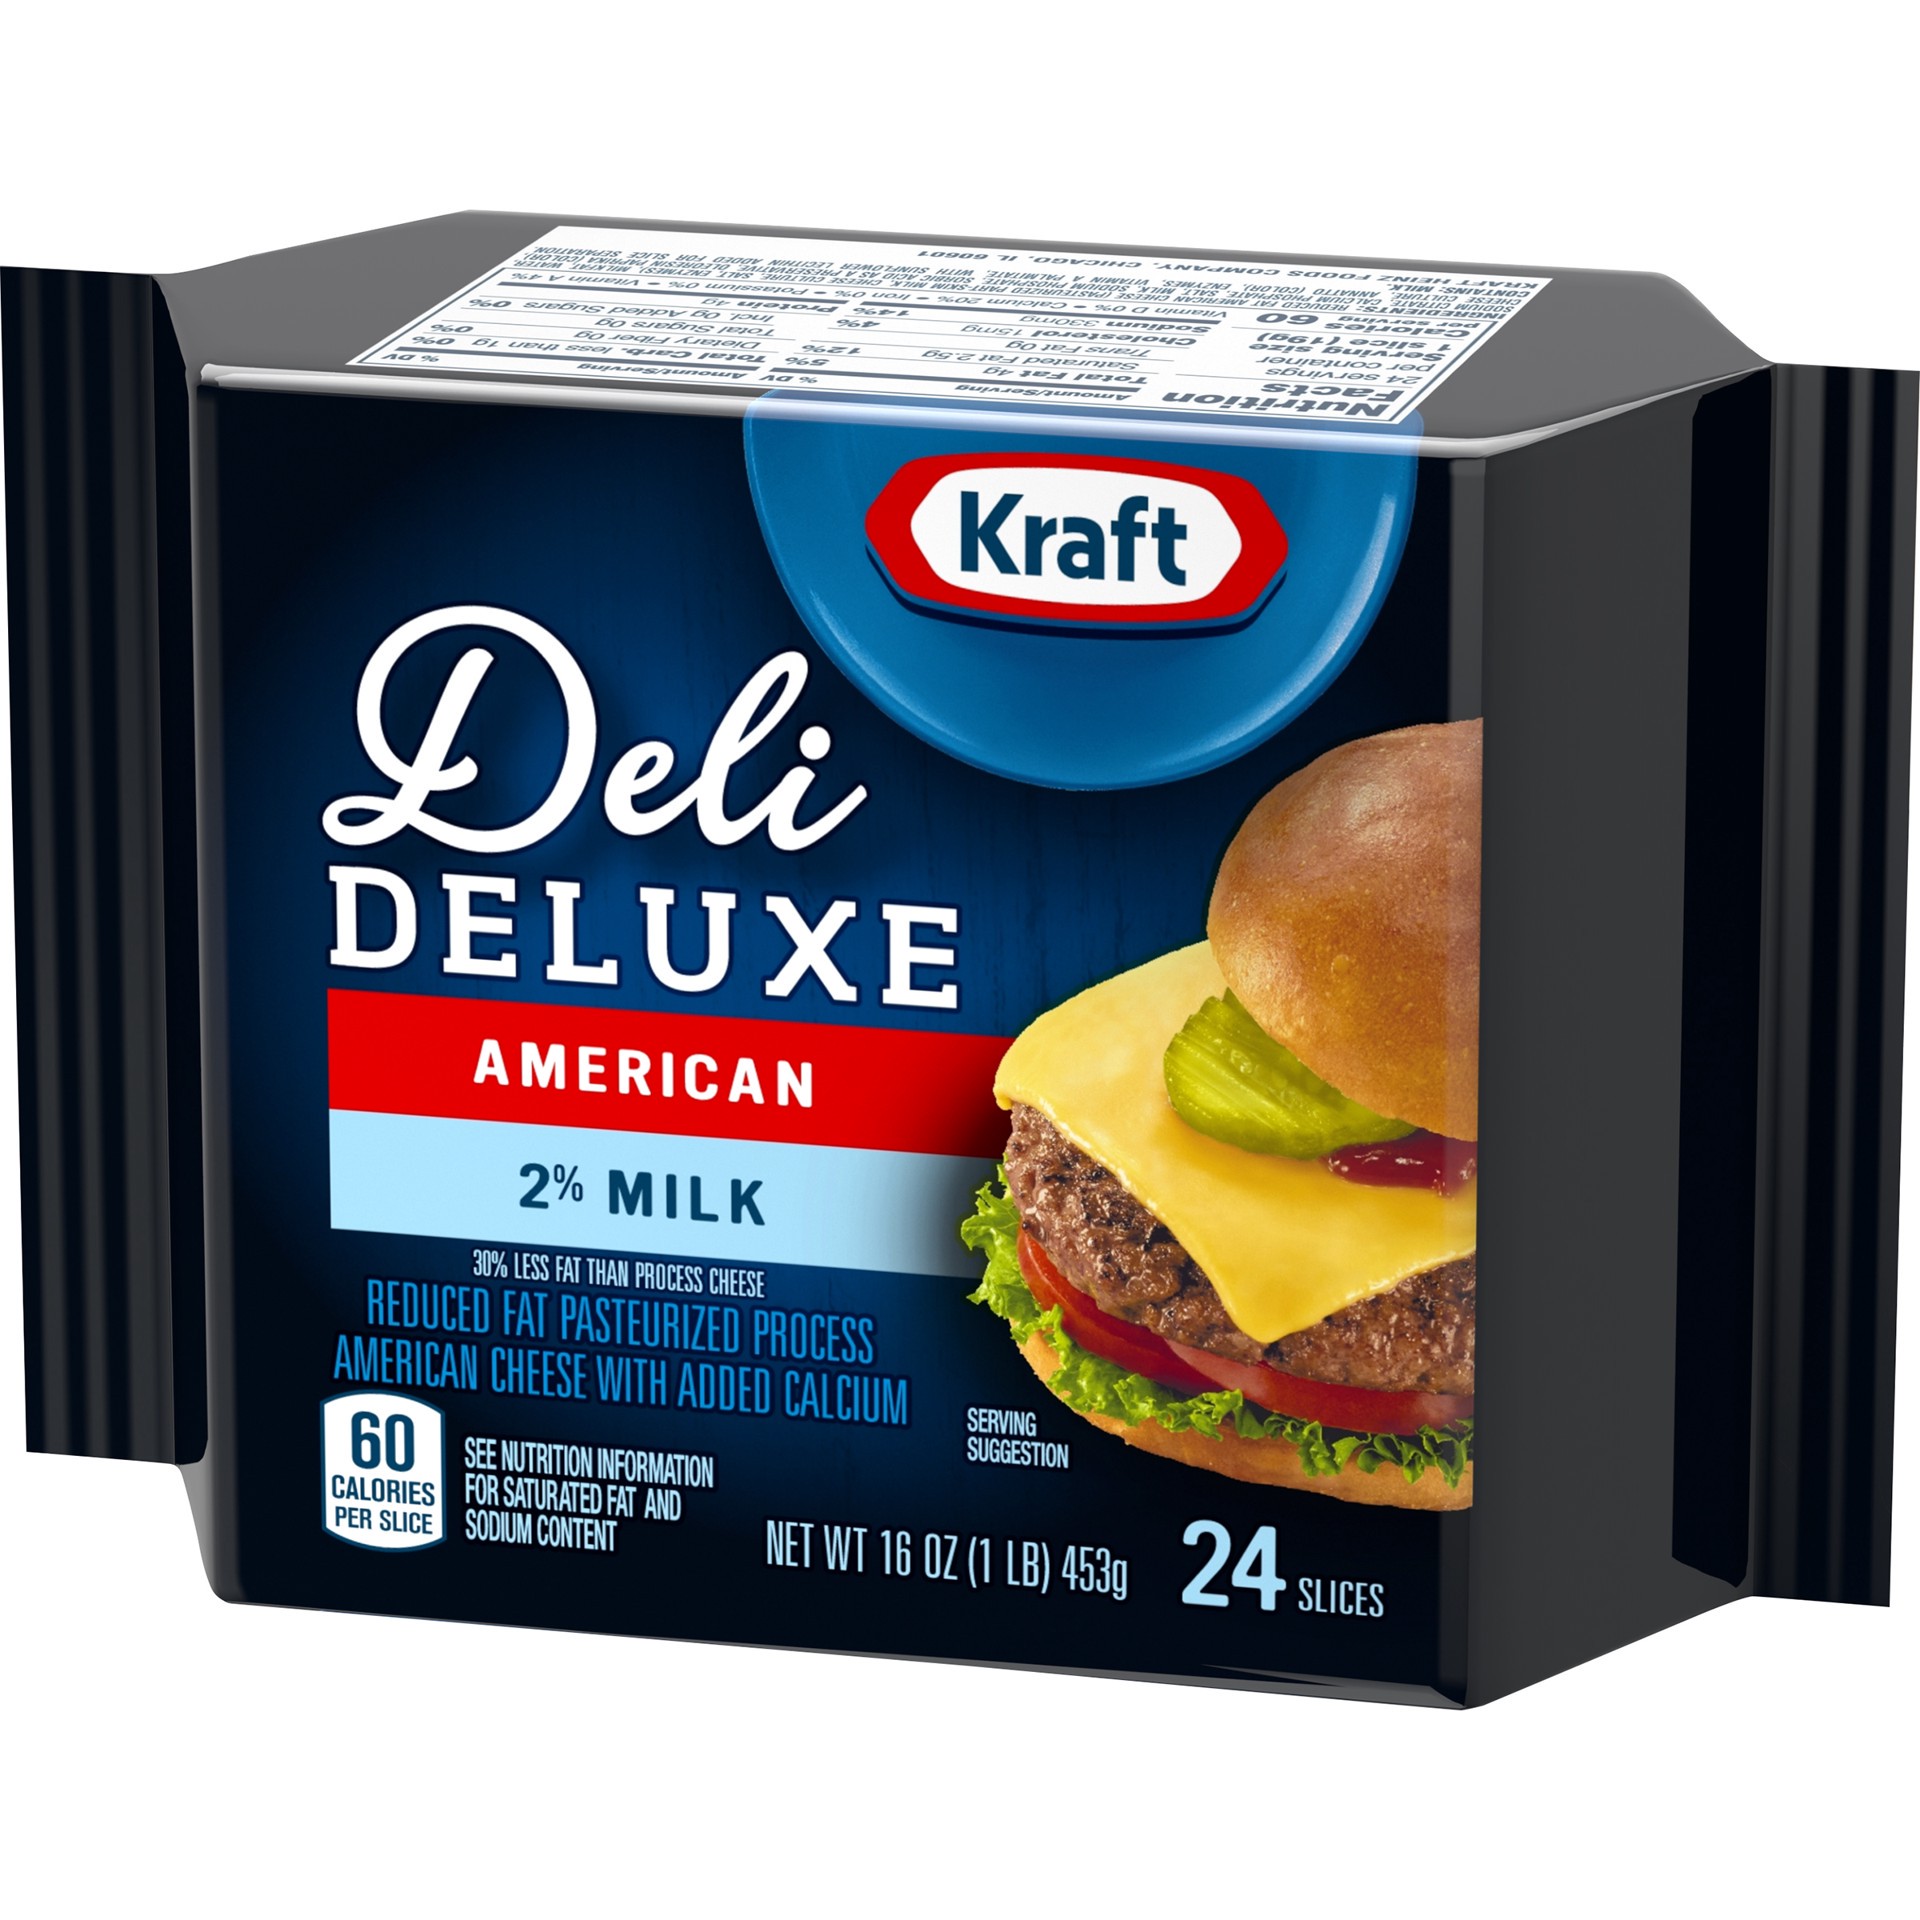 slide 2 of 6, Kraft Deli Deluxe American Cheese Slices with 2% Milk Pack, 16 oz